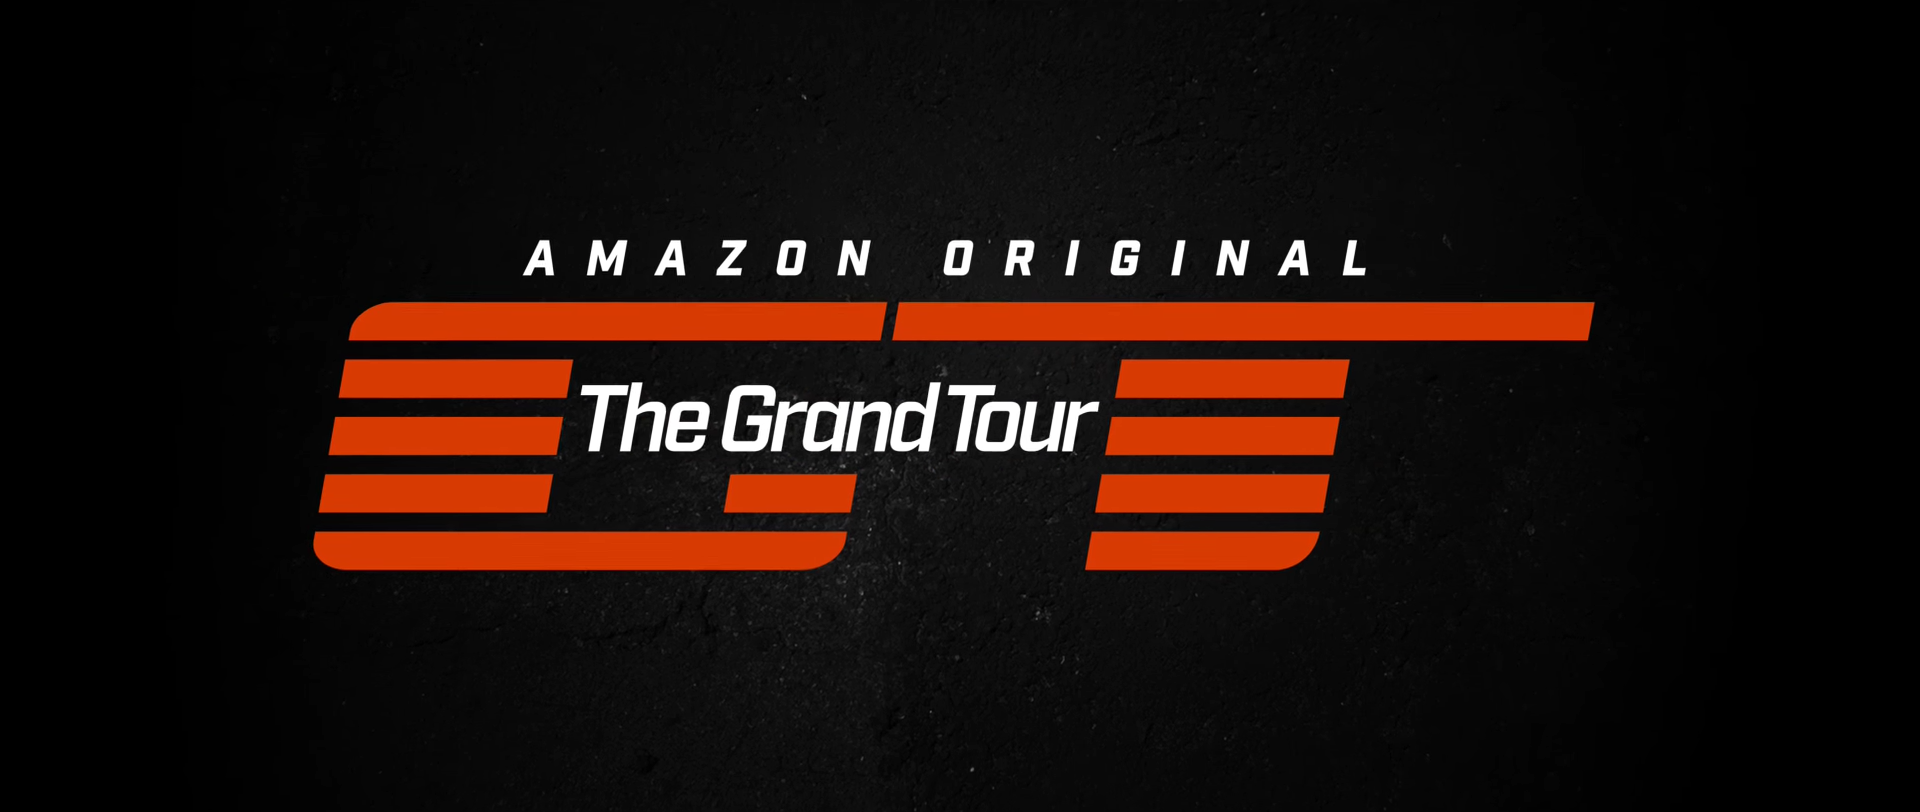 The Grand Tour. Photo by: The Grand Tour / YouTube